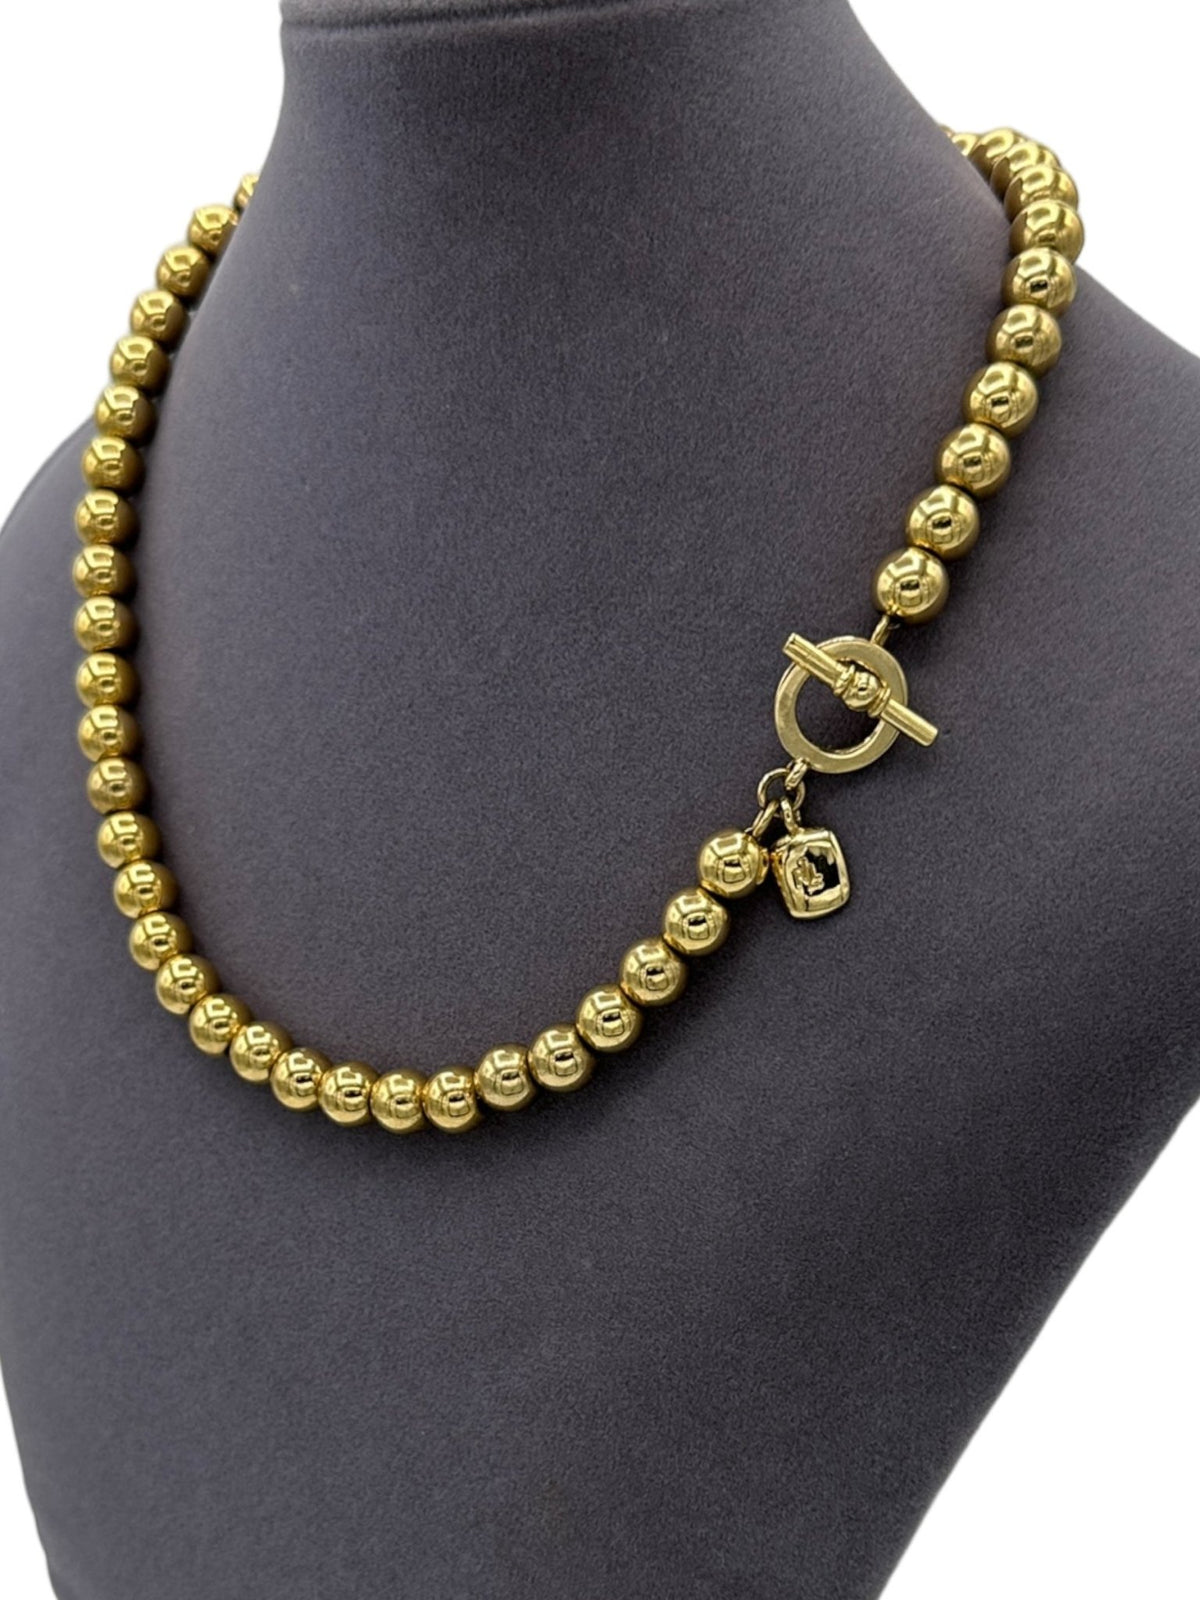 Ralph Lauren Gold Classic Ball Bead Layering Necklace - 24 Wishes Vintage Jewelry